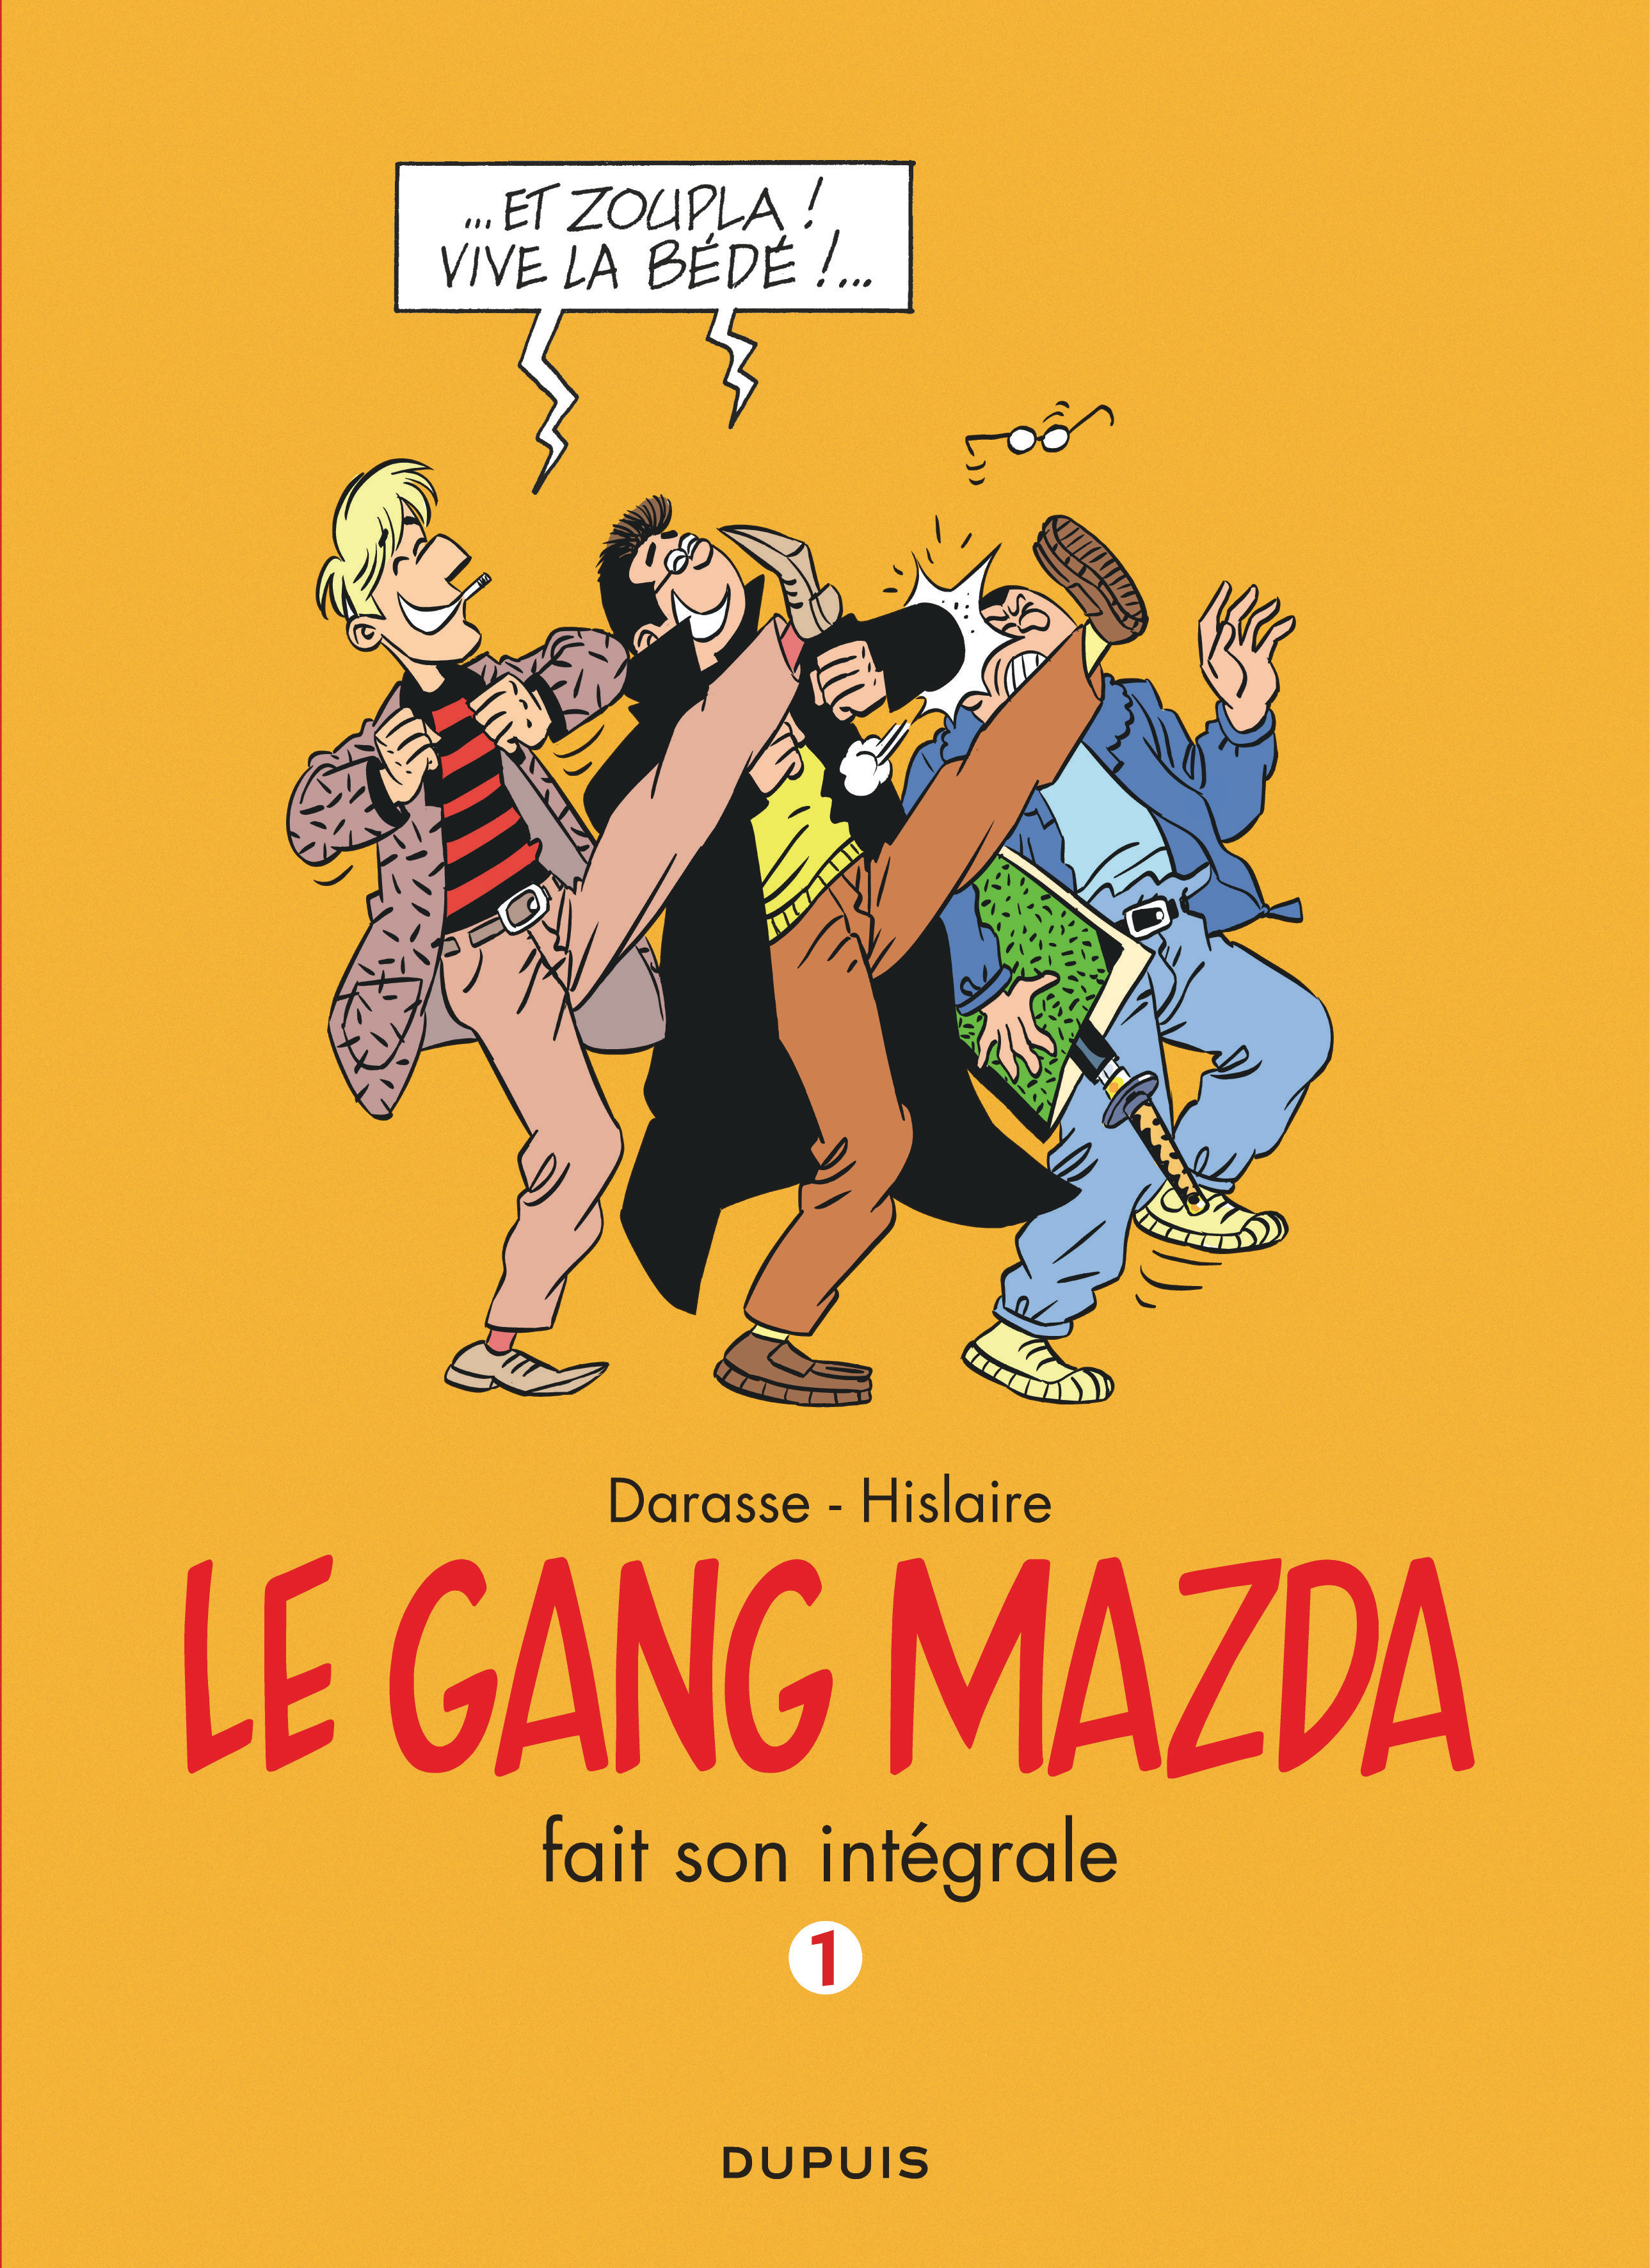 Le gang Mazda - L'Intégrale - Tome 1 - Gang Mazda - L'Intégrale, tome 1 (9782800160818-front-cover)